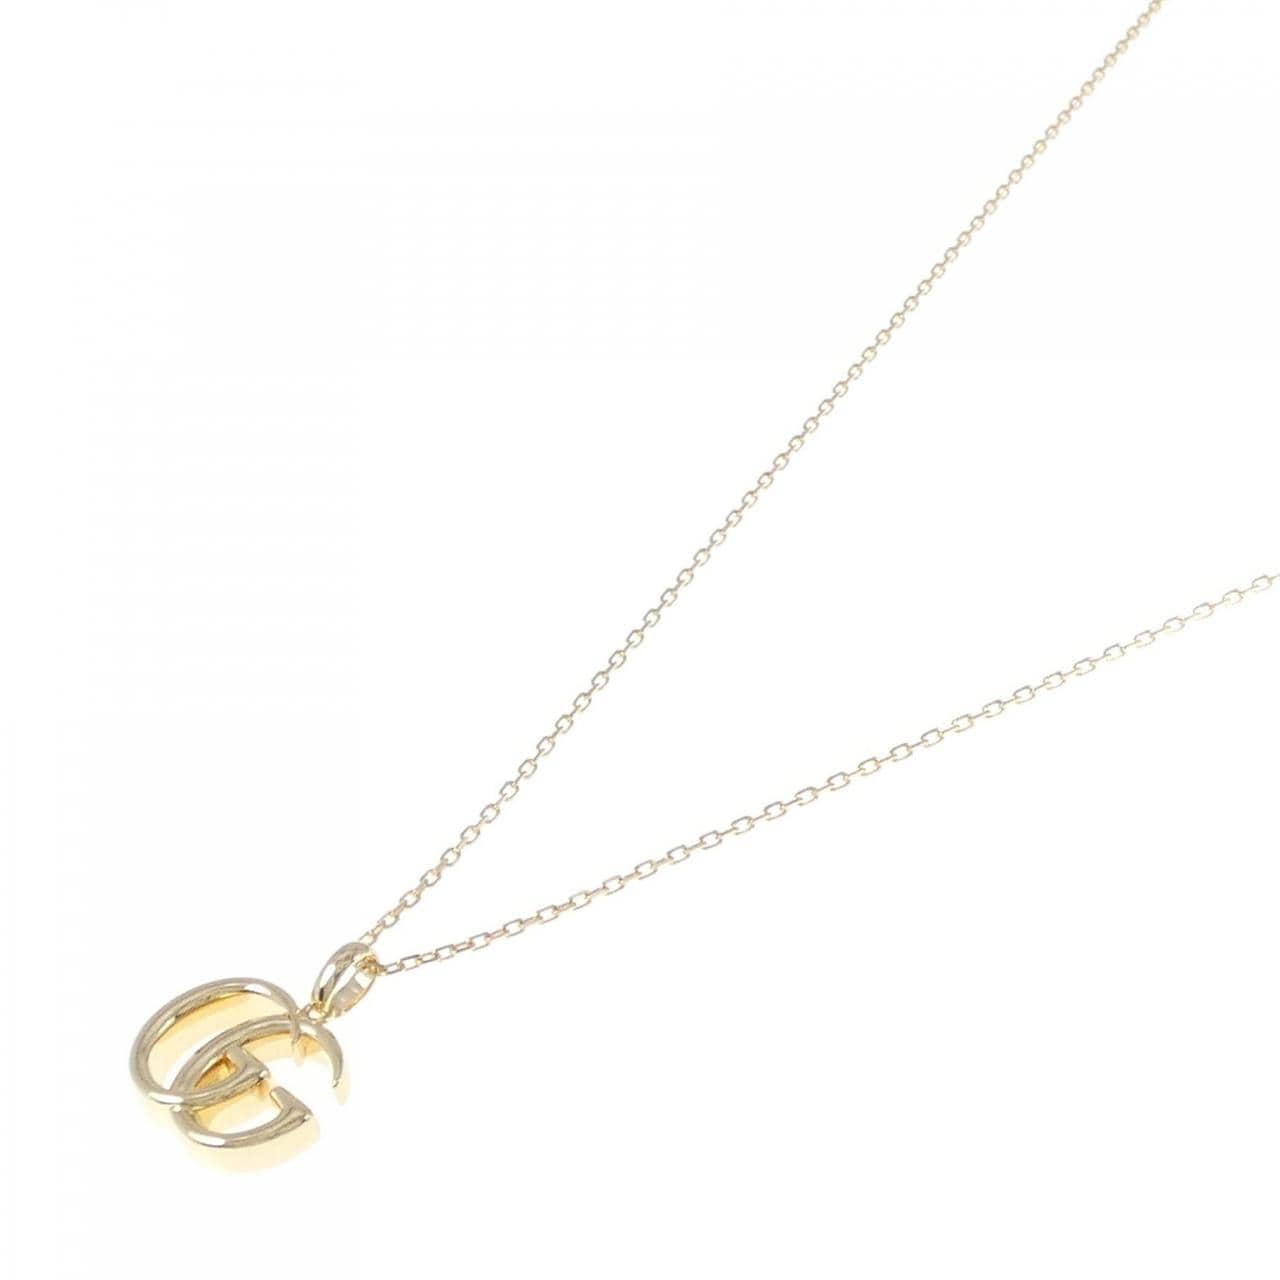 gucci double g necklace